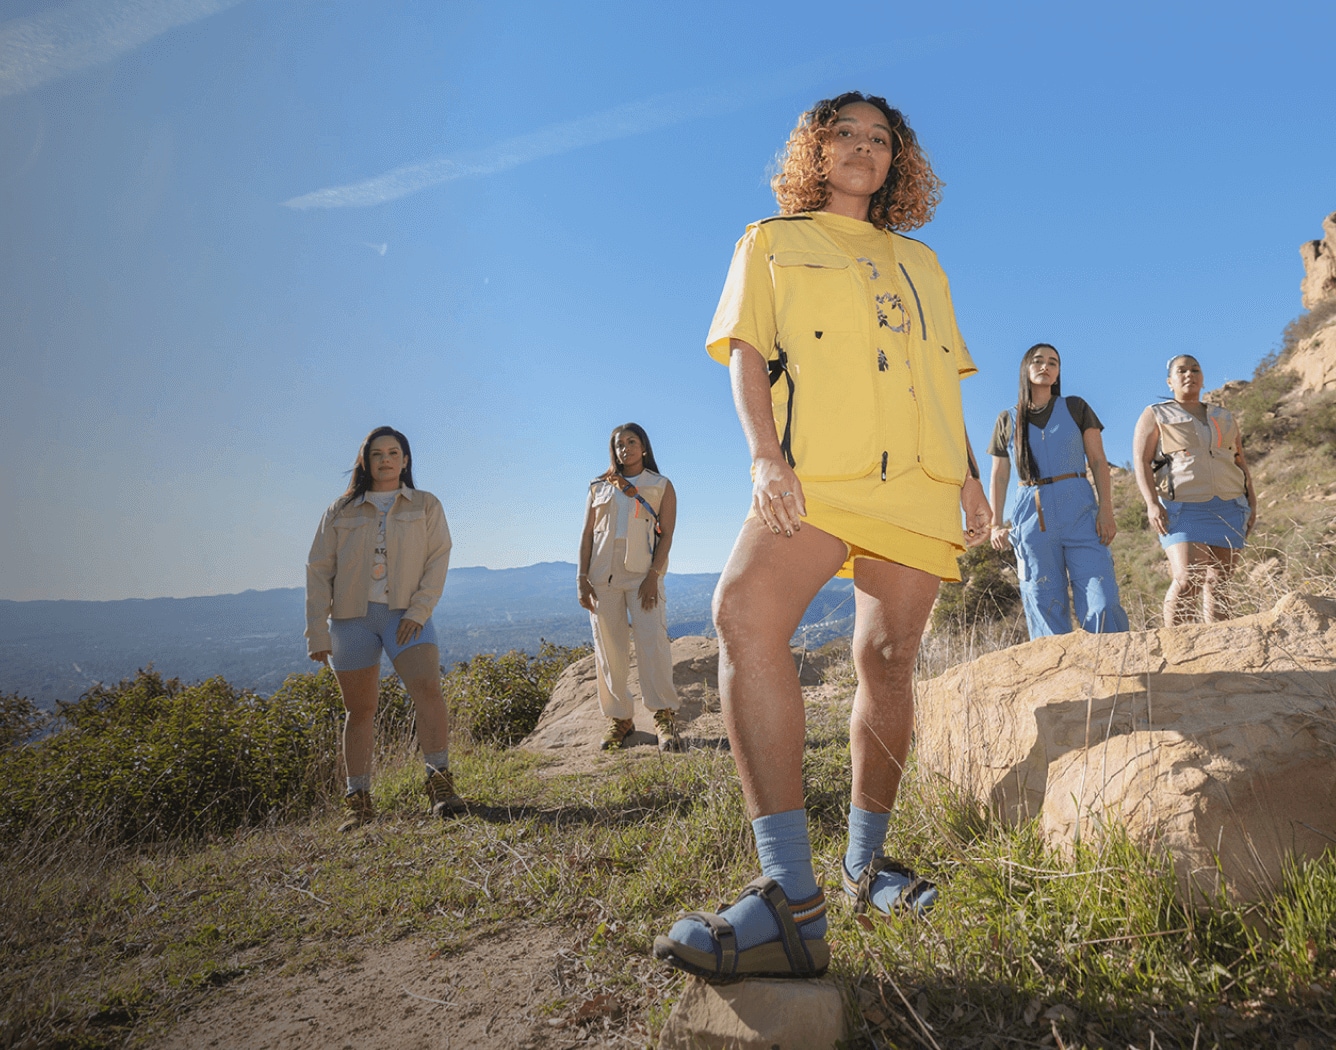 Explore Fund council member Evelynn Escobar and four women pose under blue skies wearing gear from The North Face Hike Clerb Capsule Collection.